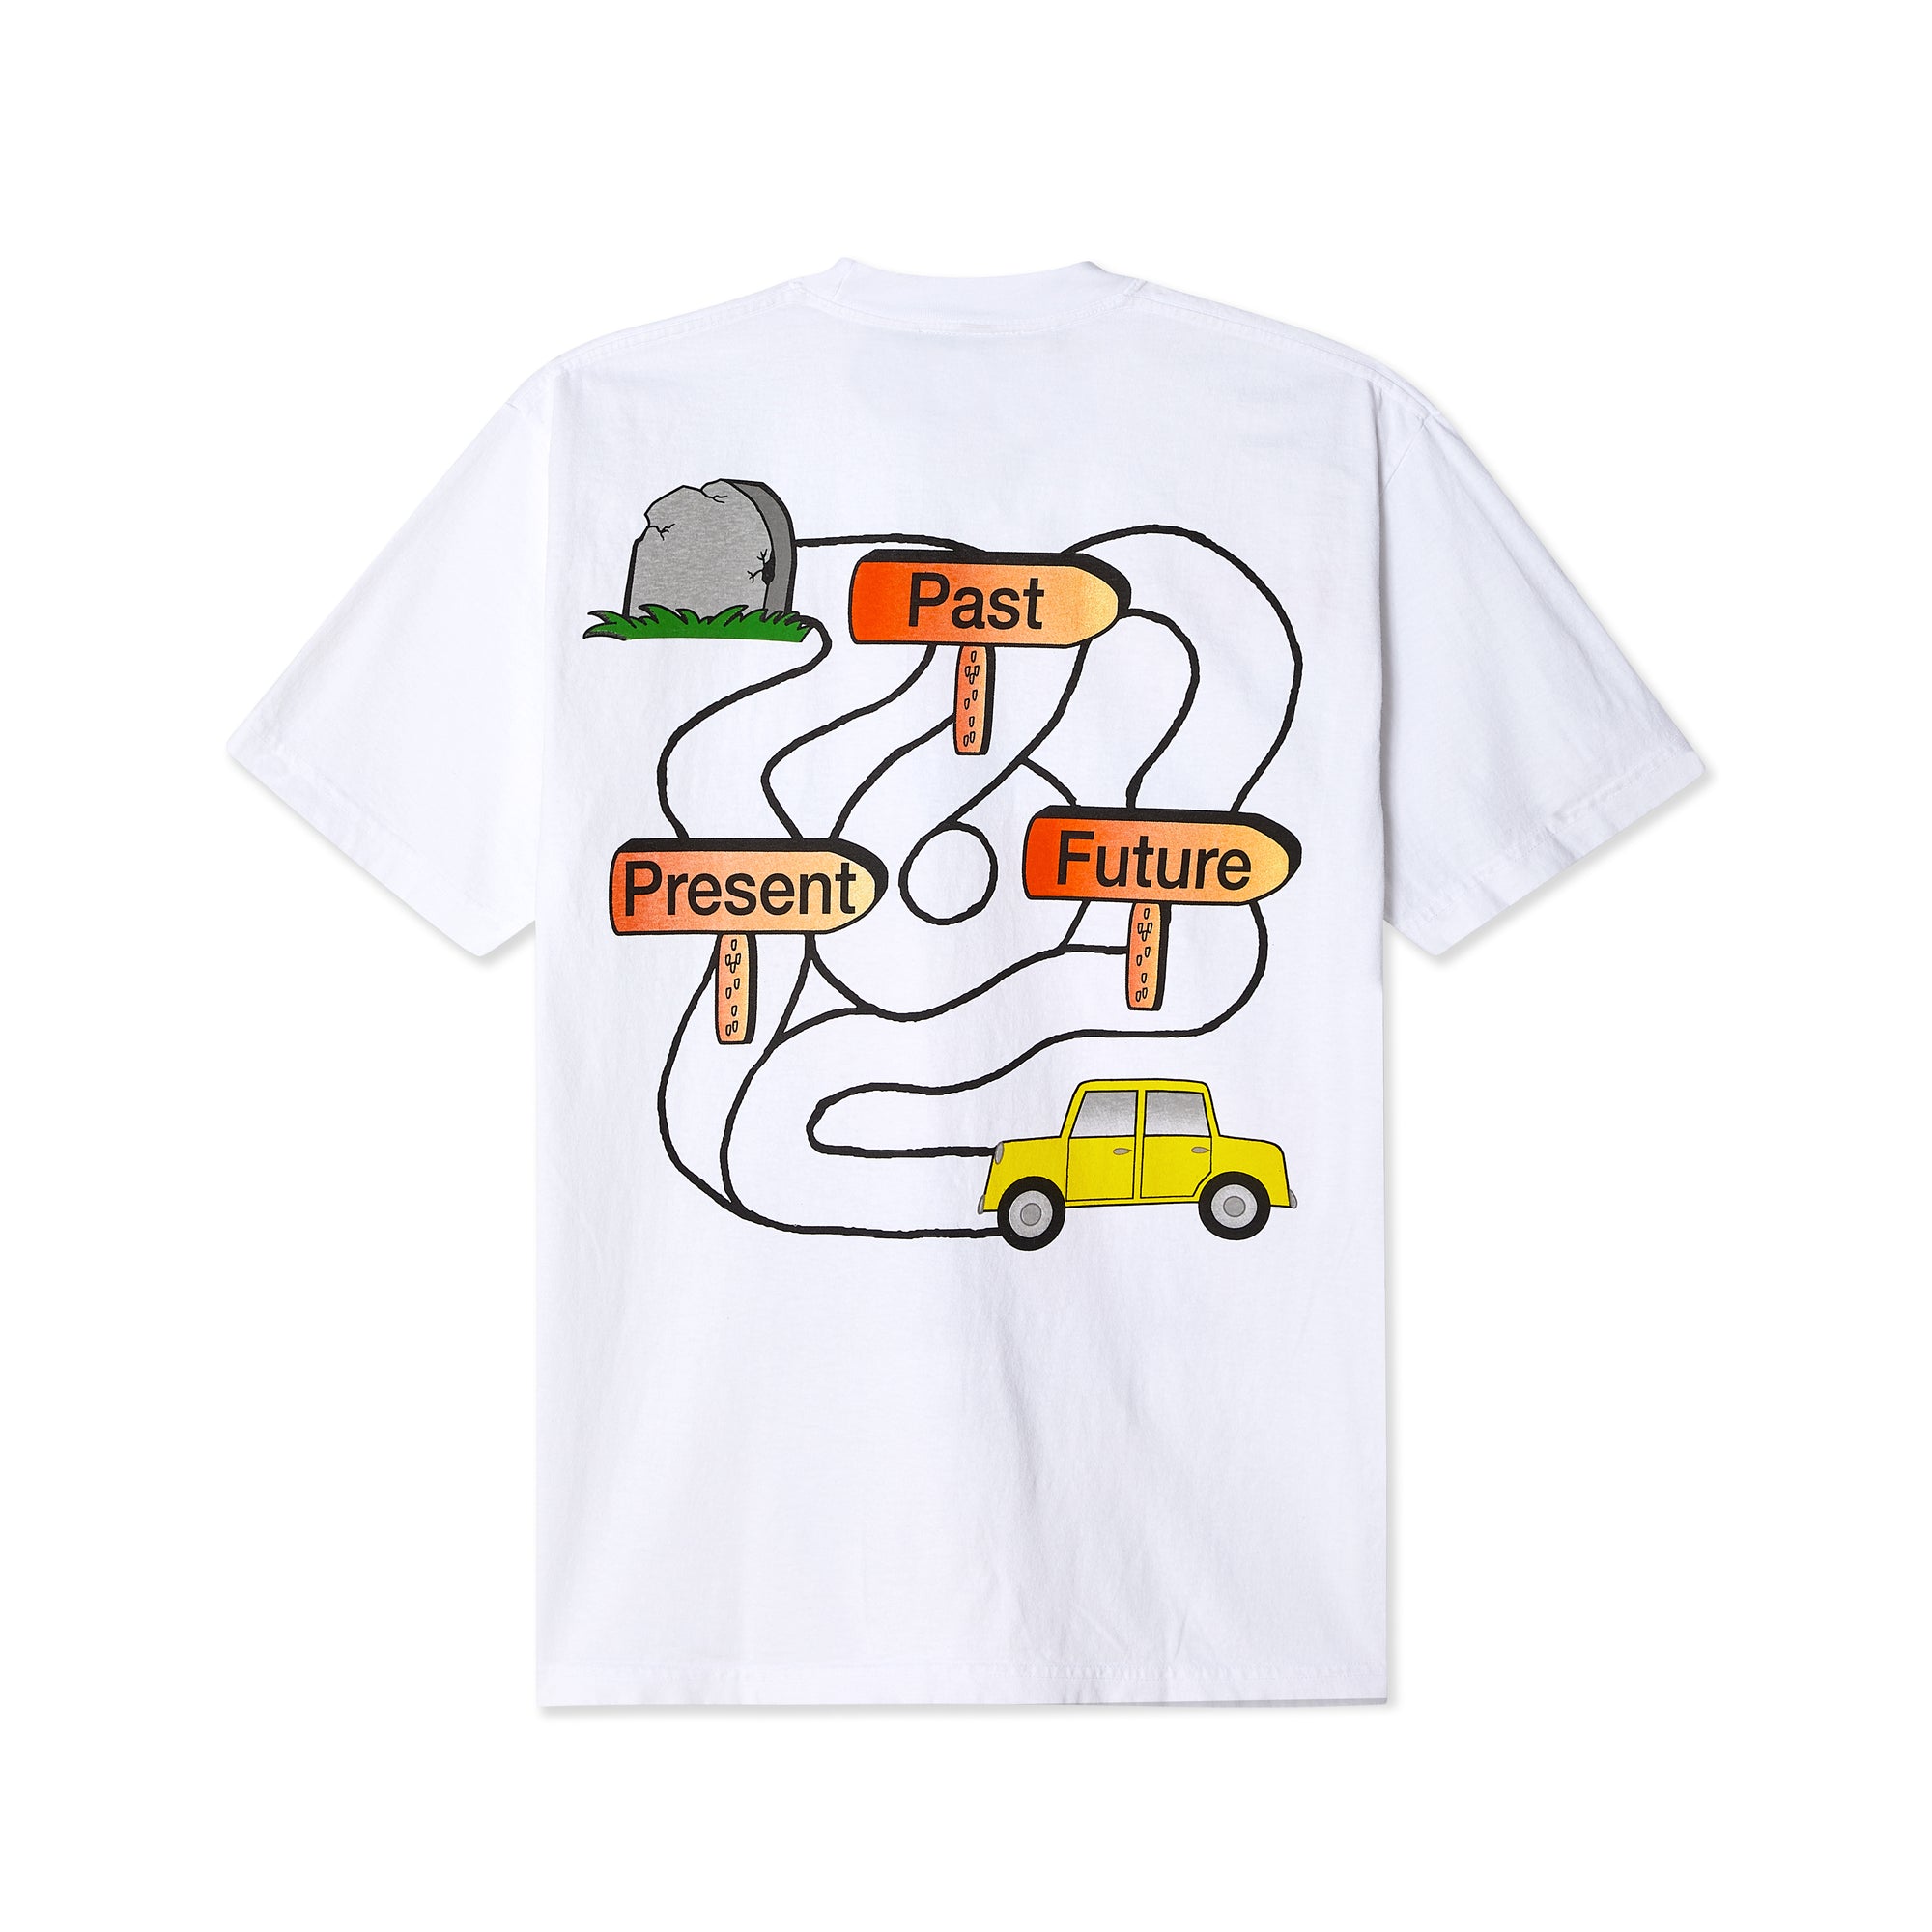 Online Ceramics - It’s Only A Short Trip T-Shirt - (White) view 2